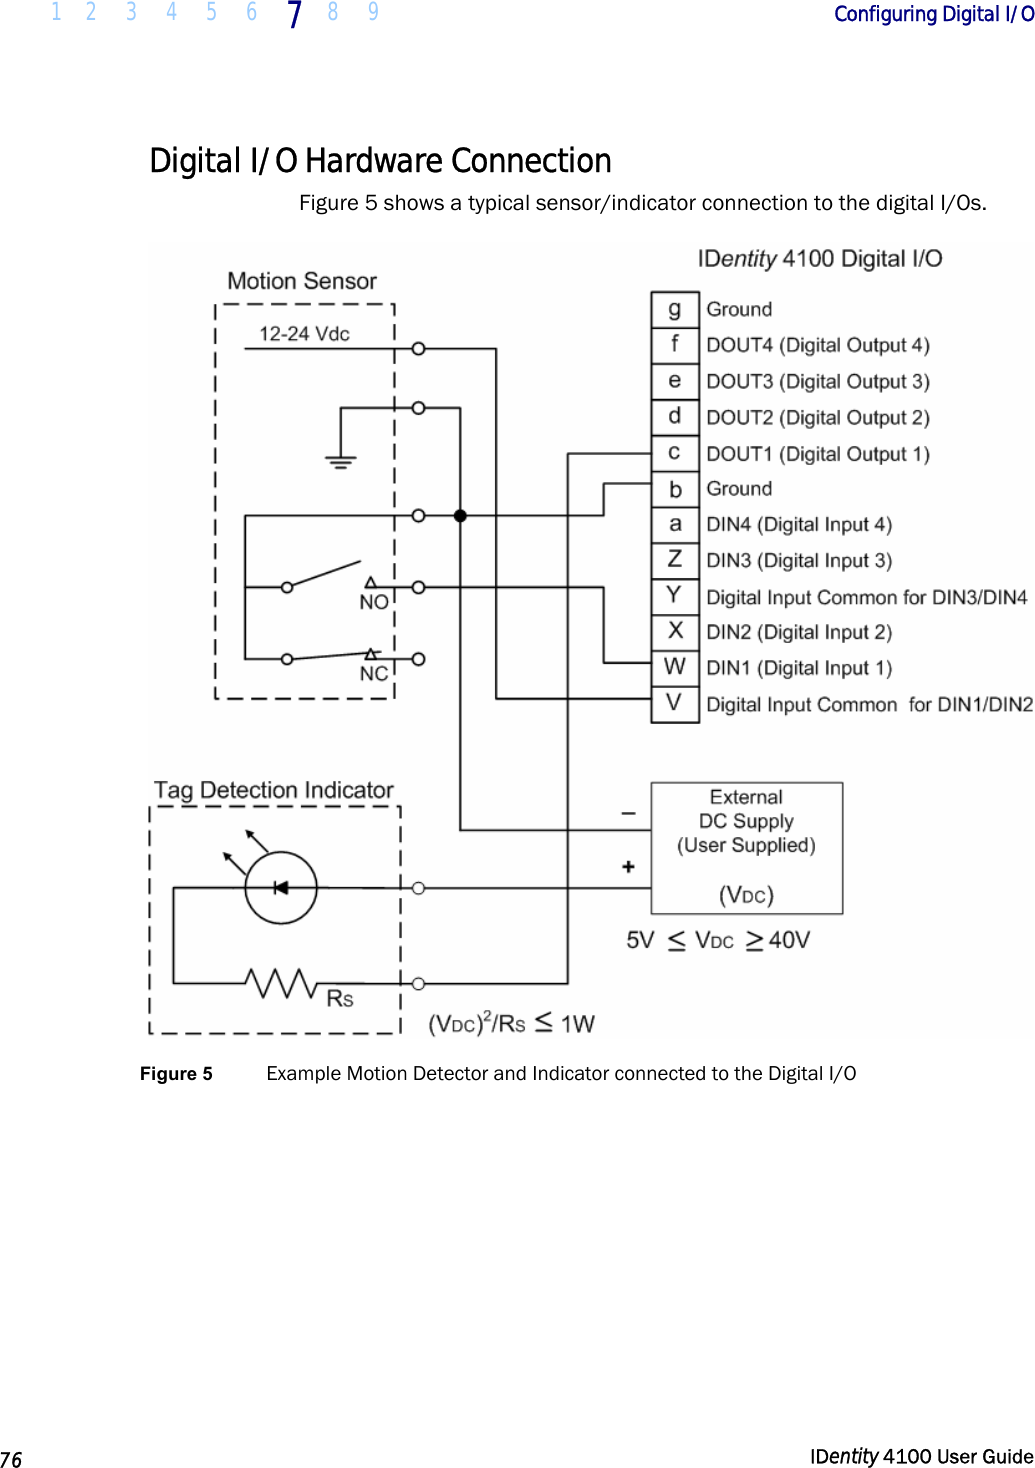  1 2 3 4 5 6 7 8 9       Configuring Digital I/O   76  IDentity 4100 User Guide  Digital I/O Hardware Connection Figure 5 shows a typical sensor/indicator connection to the digital I/Os.  Figure 5  Example Motion Detector and Indicator connected to the Digital I/O    